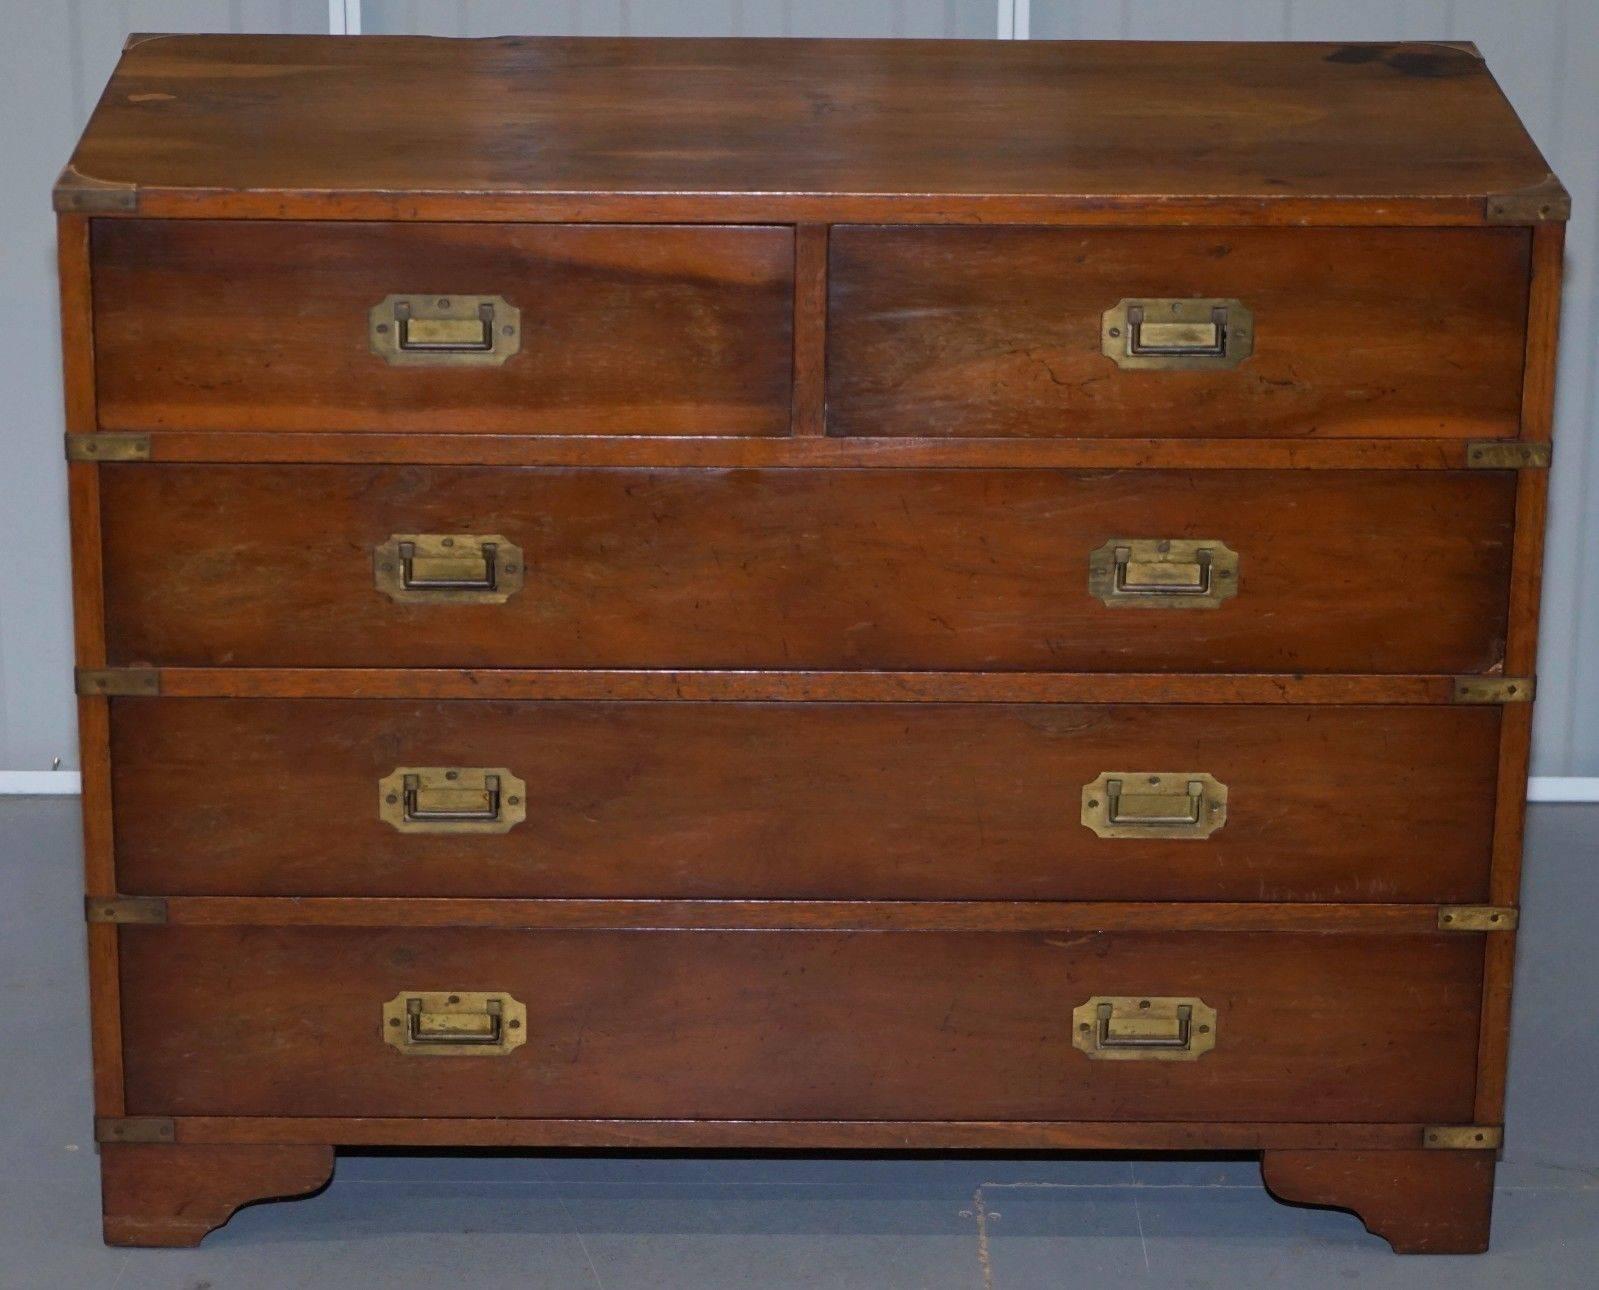 We are delighted to offer for sale this lovely chest of Yew wood veneer military campaign drawers with brass fittings and handles 

They are a good looking chest, very much in fashion at the moment and have been for quite a few years, there was